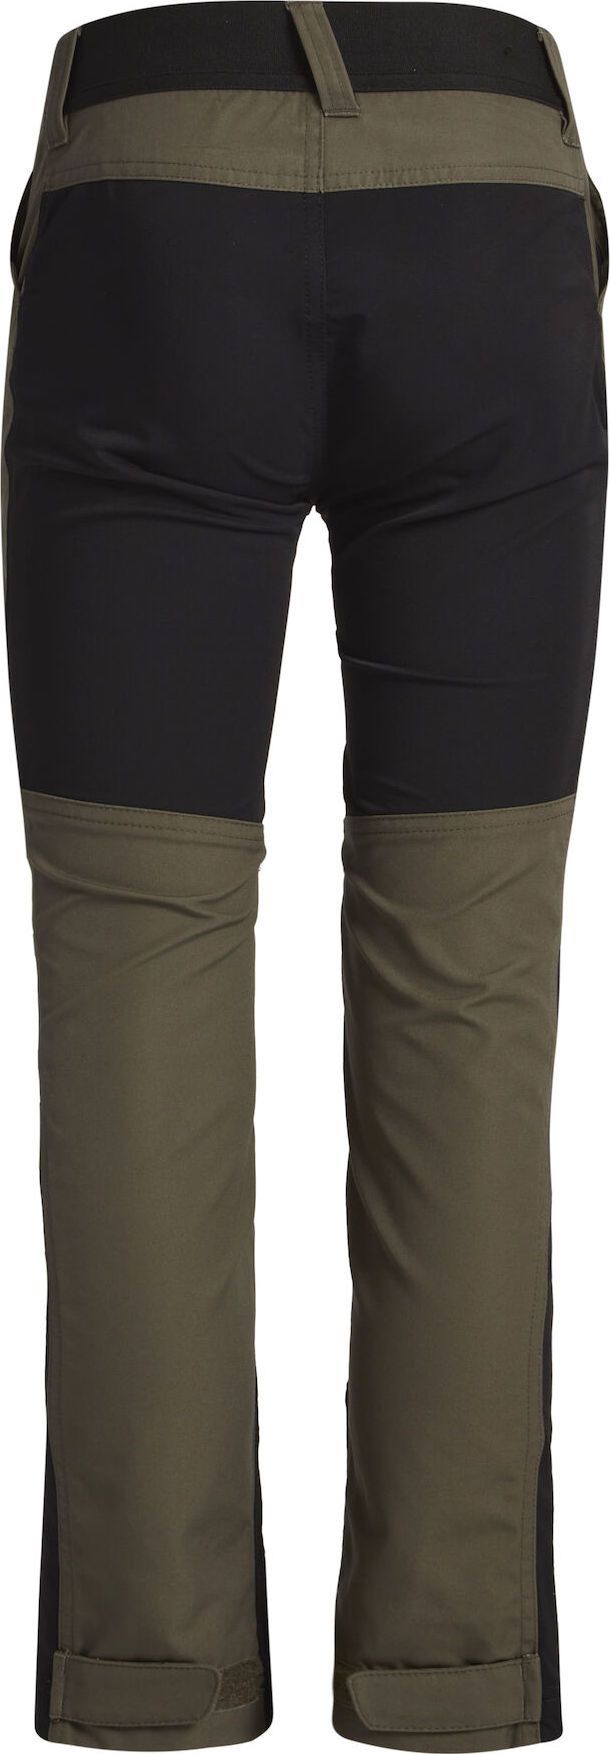 Juniors' Fulu Stretch Hybrid Pant  Forest Green/Black Lundhags